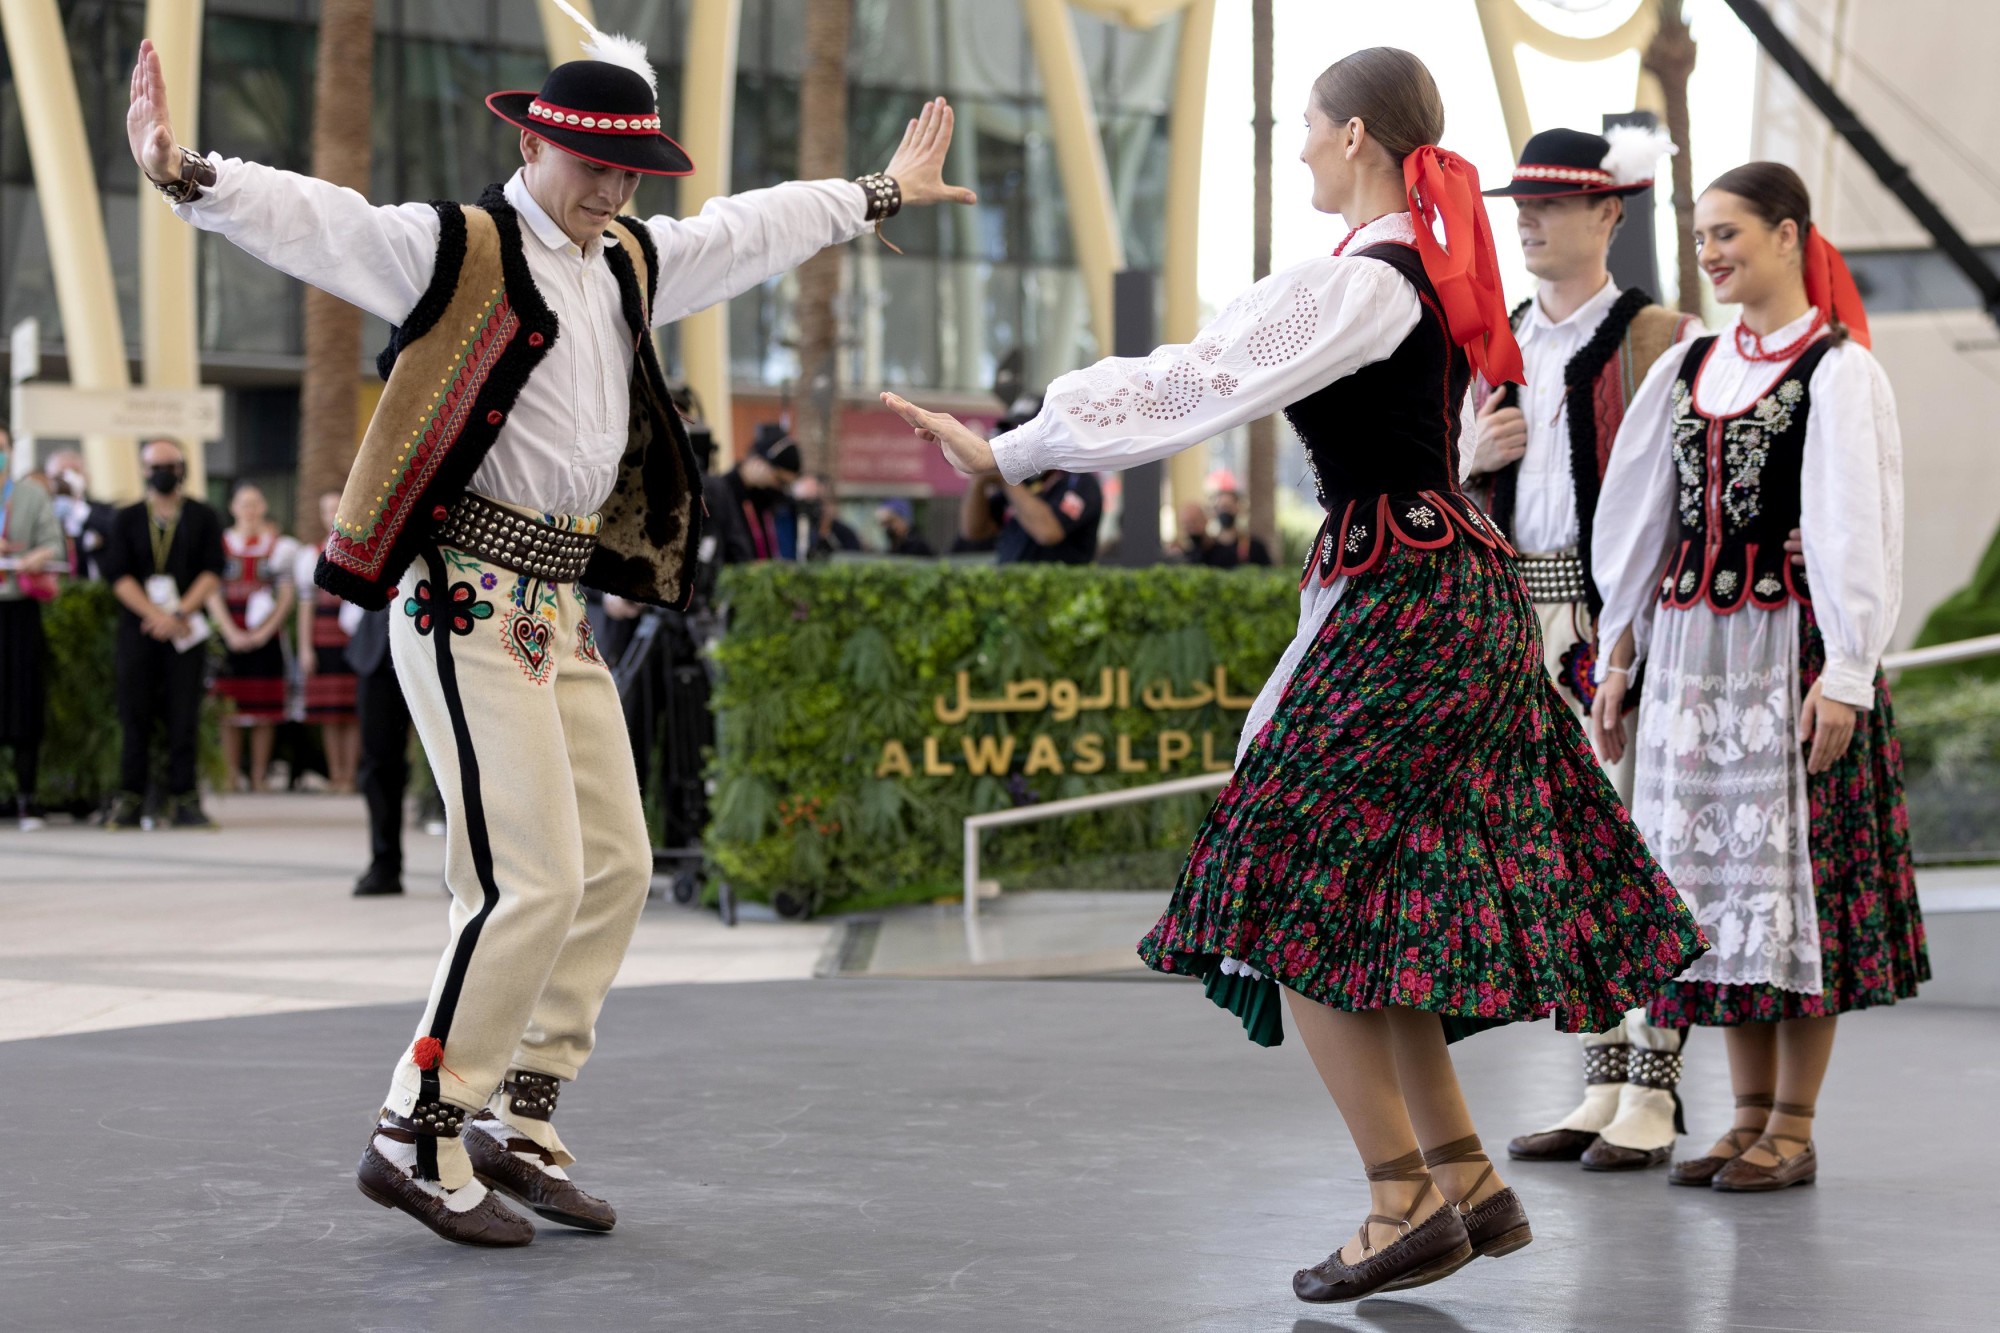 Cultural performers during the Slovakia National Day Ceremony at Al Wasl m38848